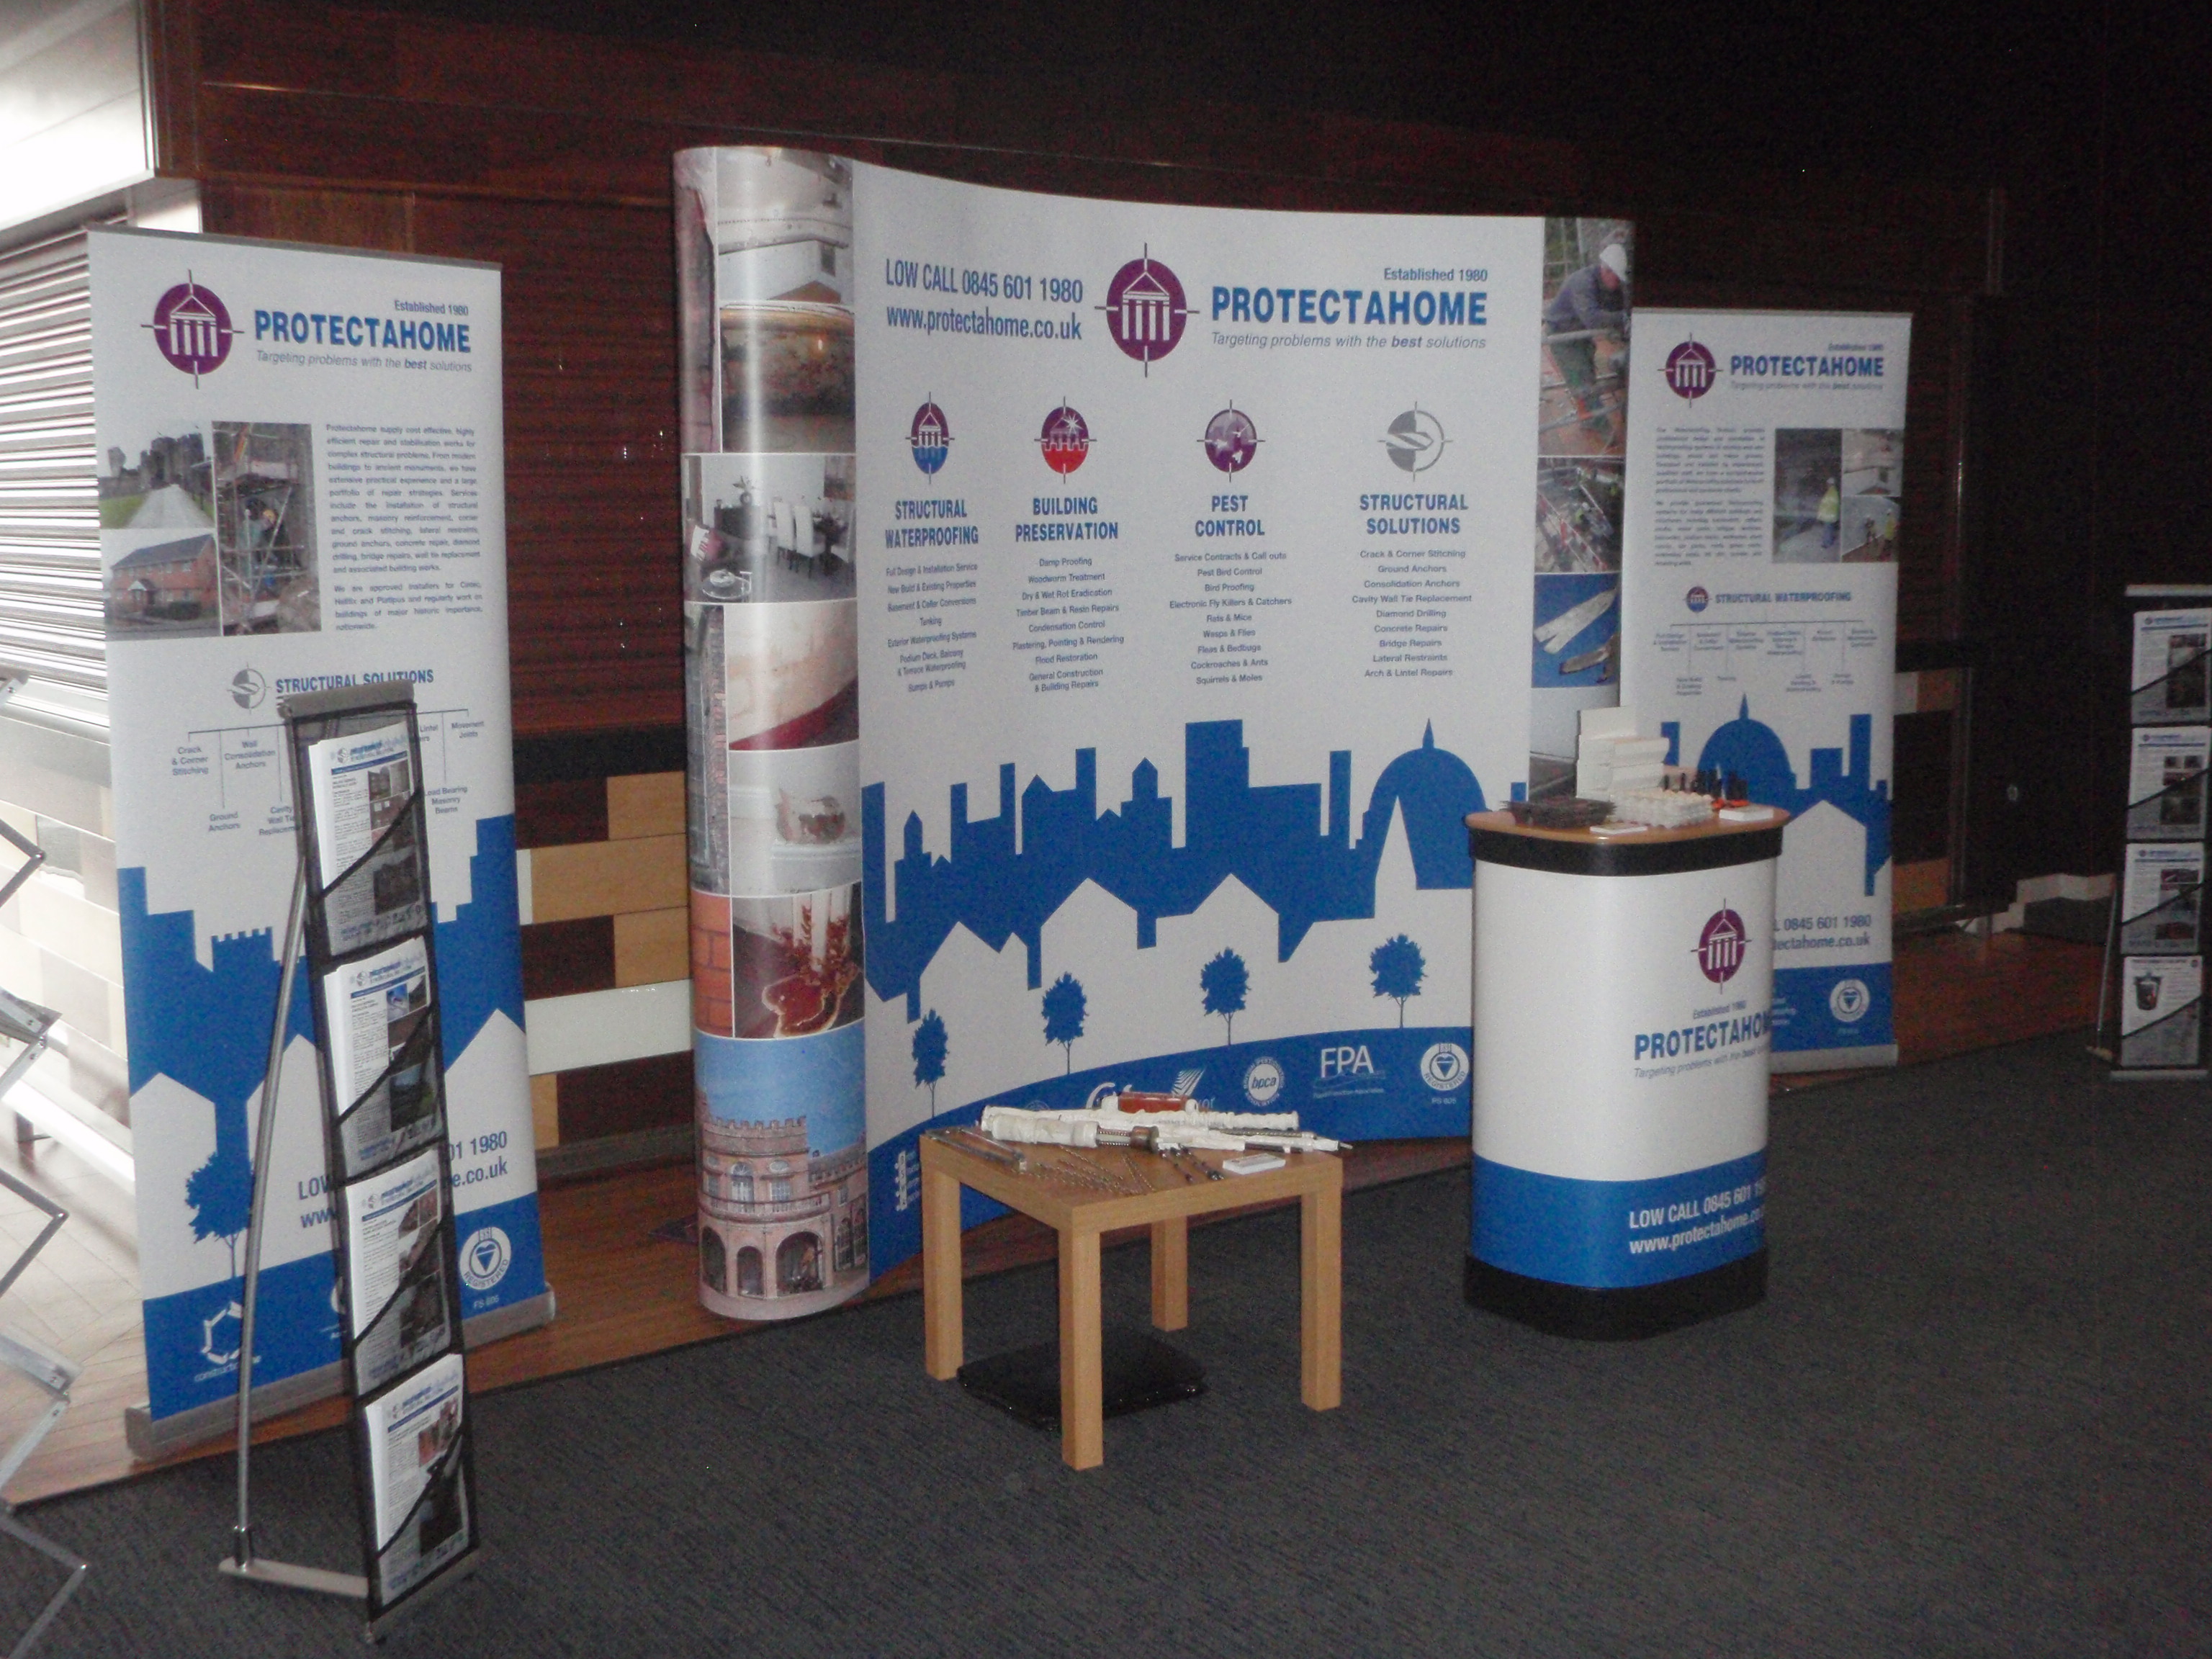 Protectahome Set Up Ready For CPD.